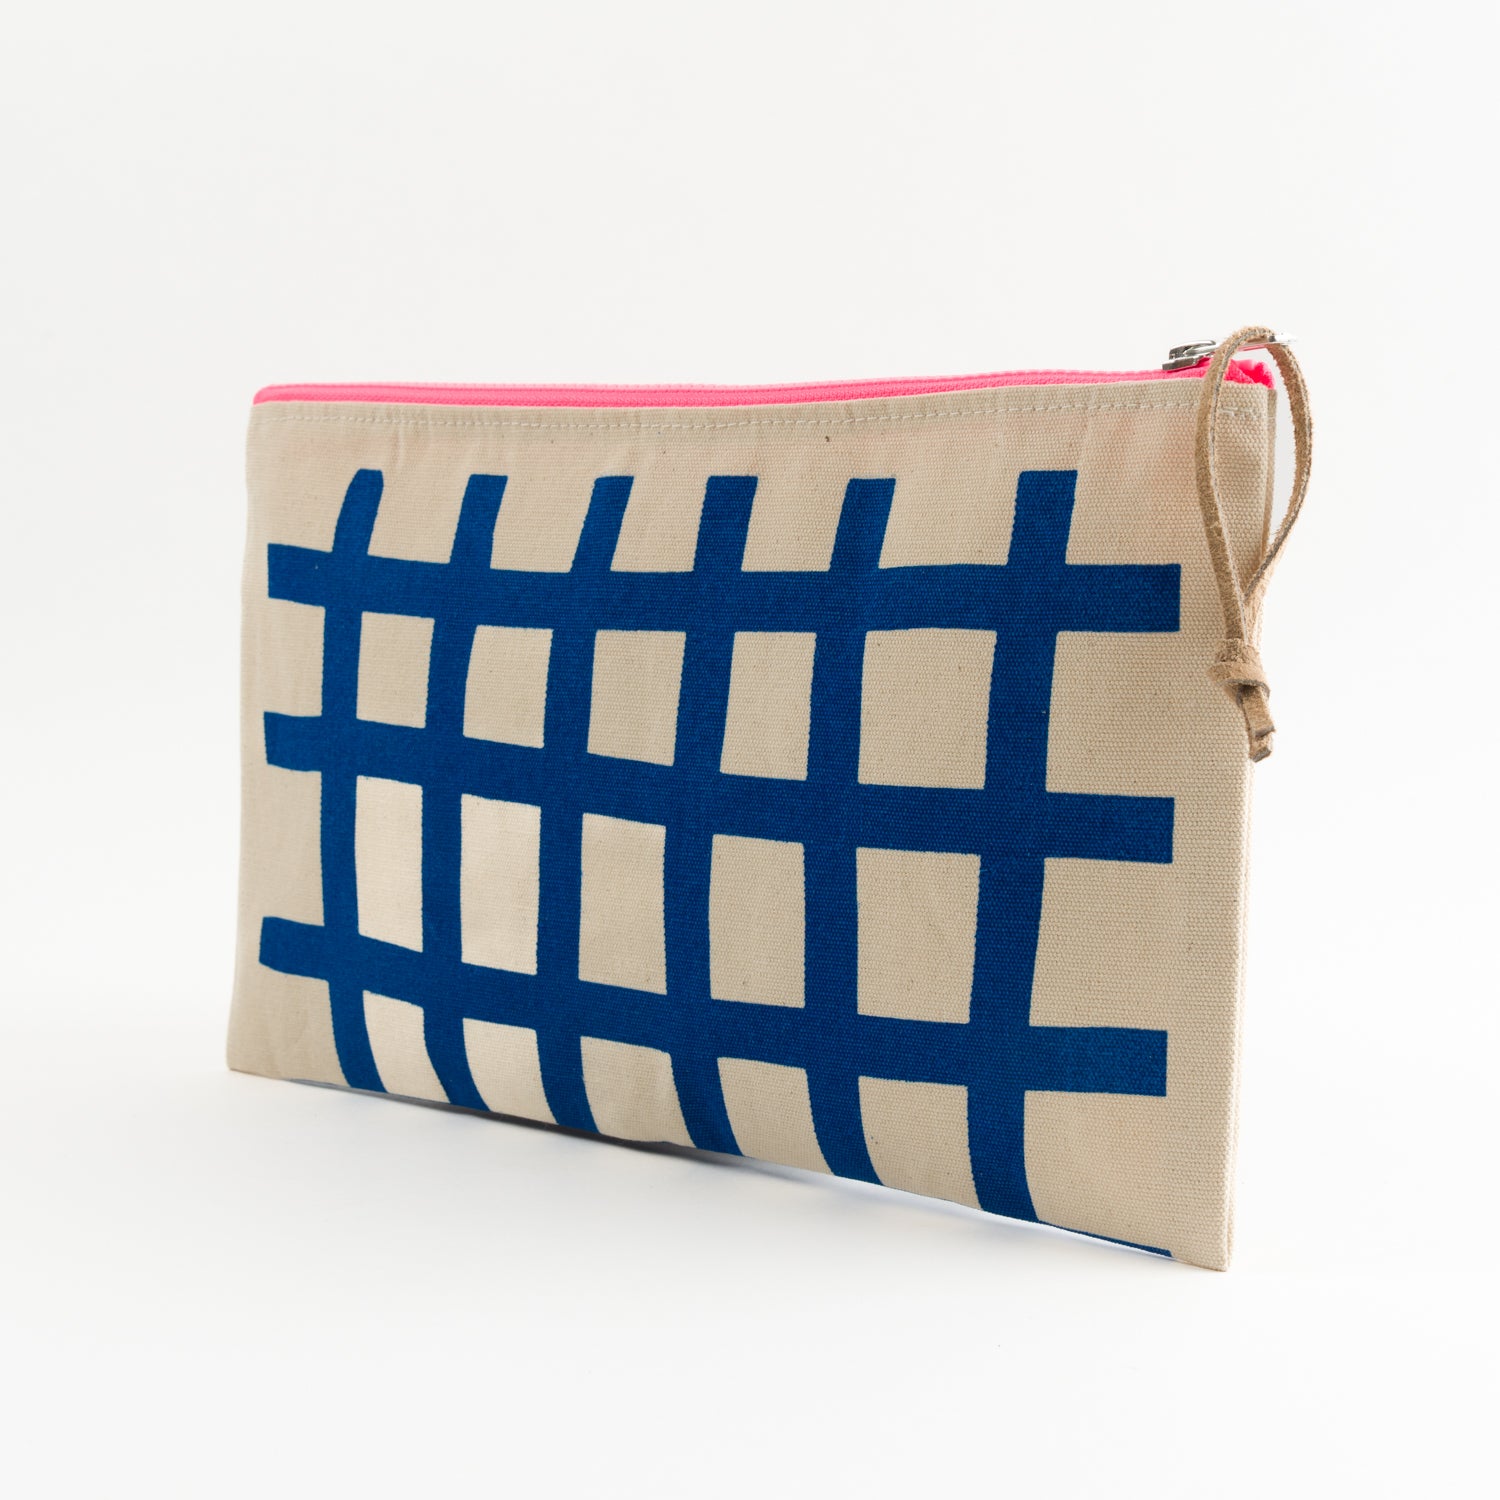 NOTIONS POUCH - SQUARE GRID DARK BLUE